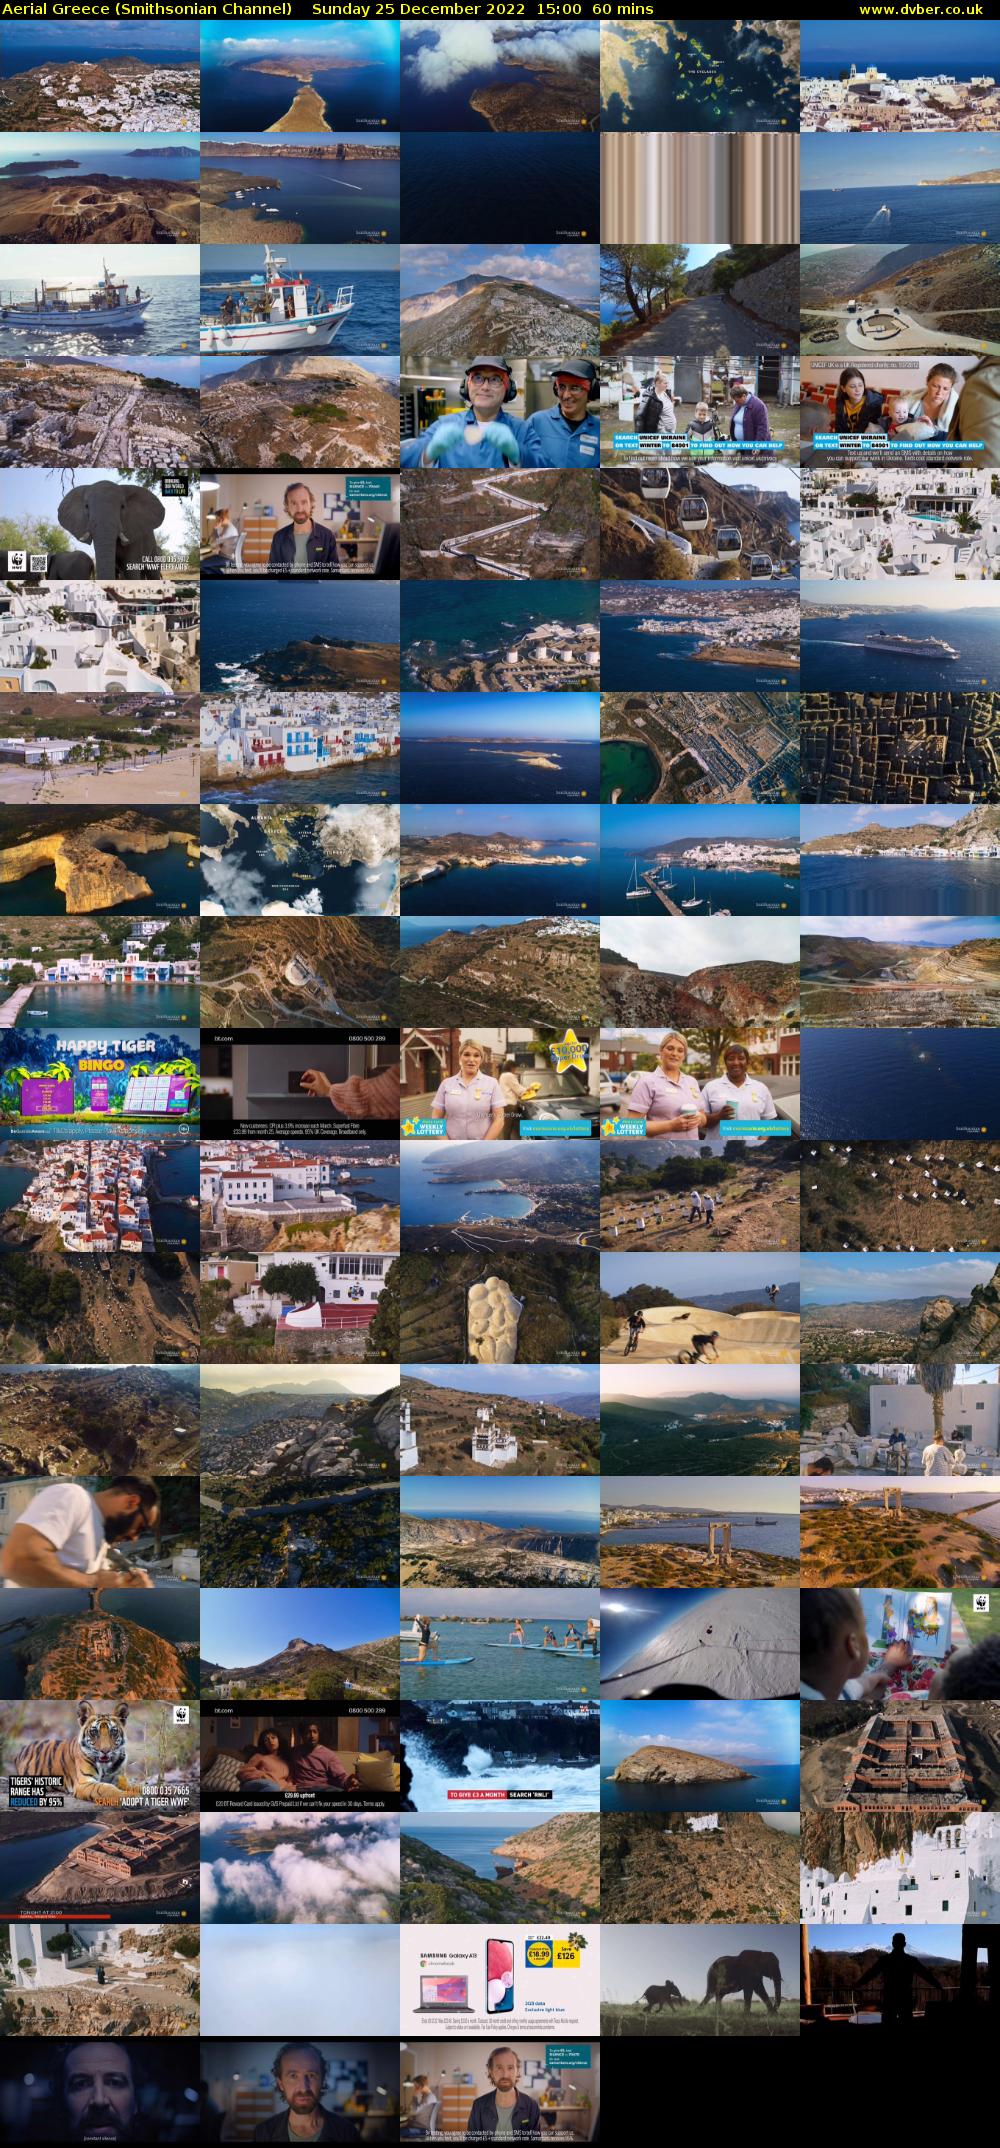 Aerial Greece (Smithsonian Channel) Sunday 25 December 2022 15:00 - 16:00